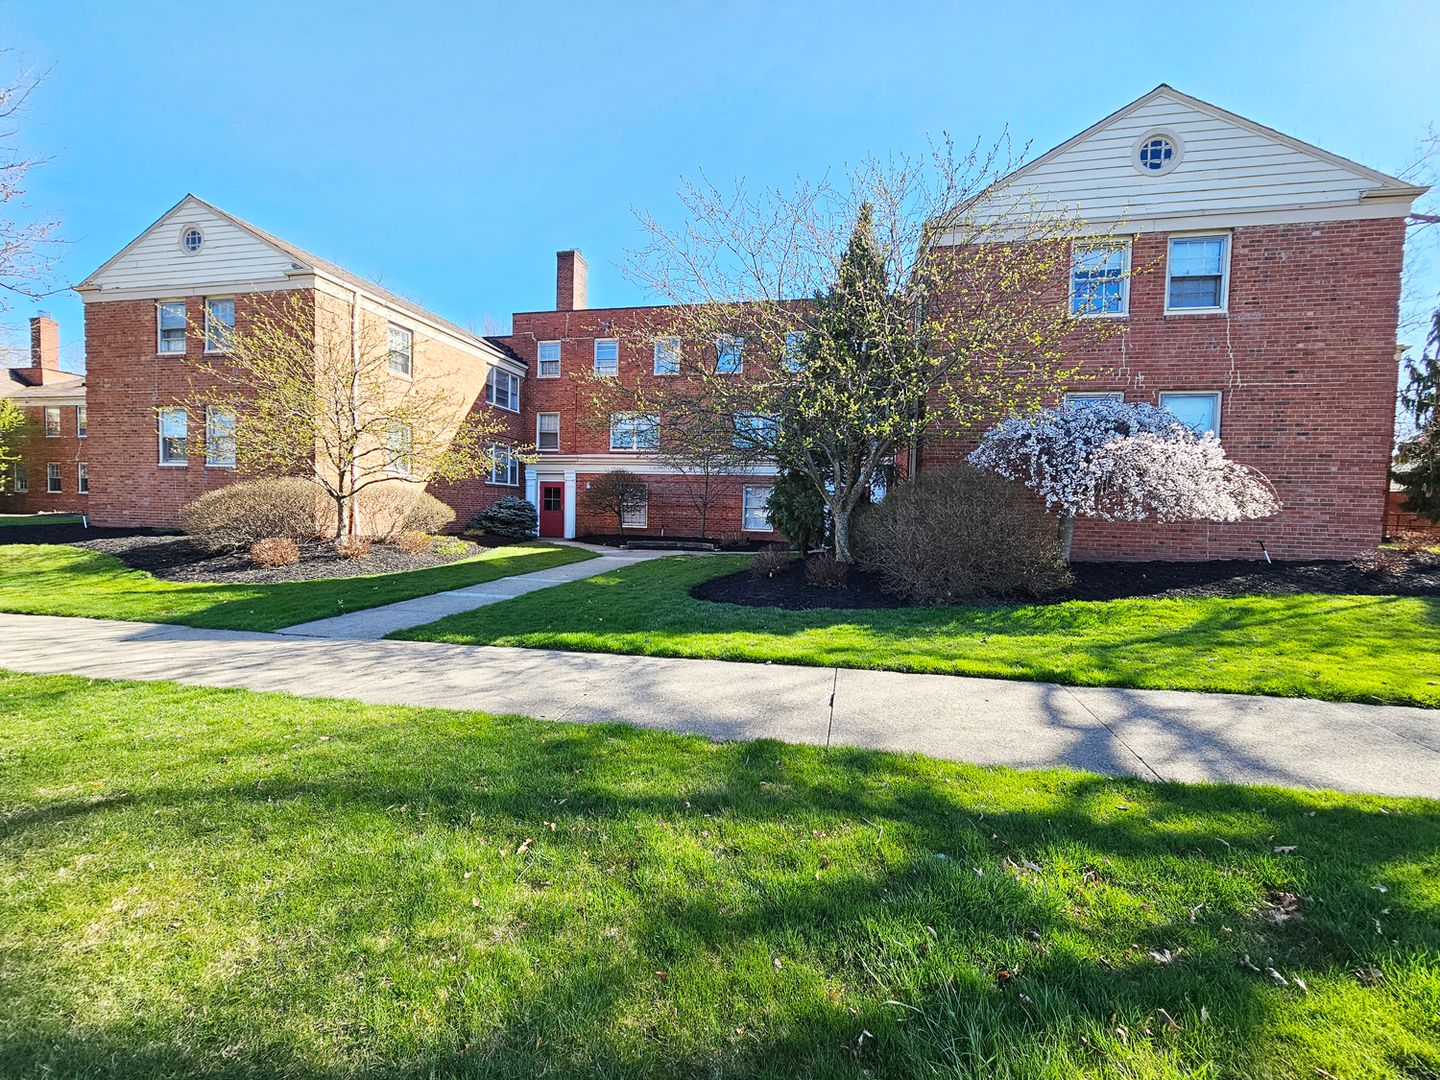 1 Bed and 1 Bath Apartments for Rent in Shaker Heights | Newly Renovated Image